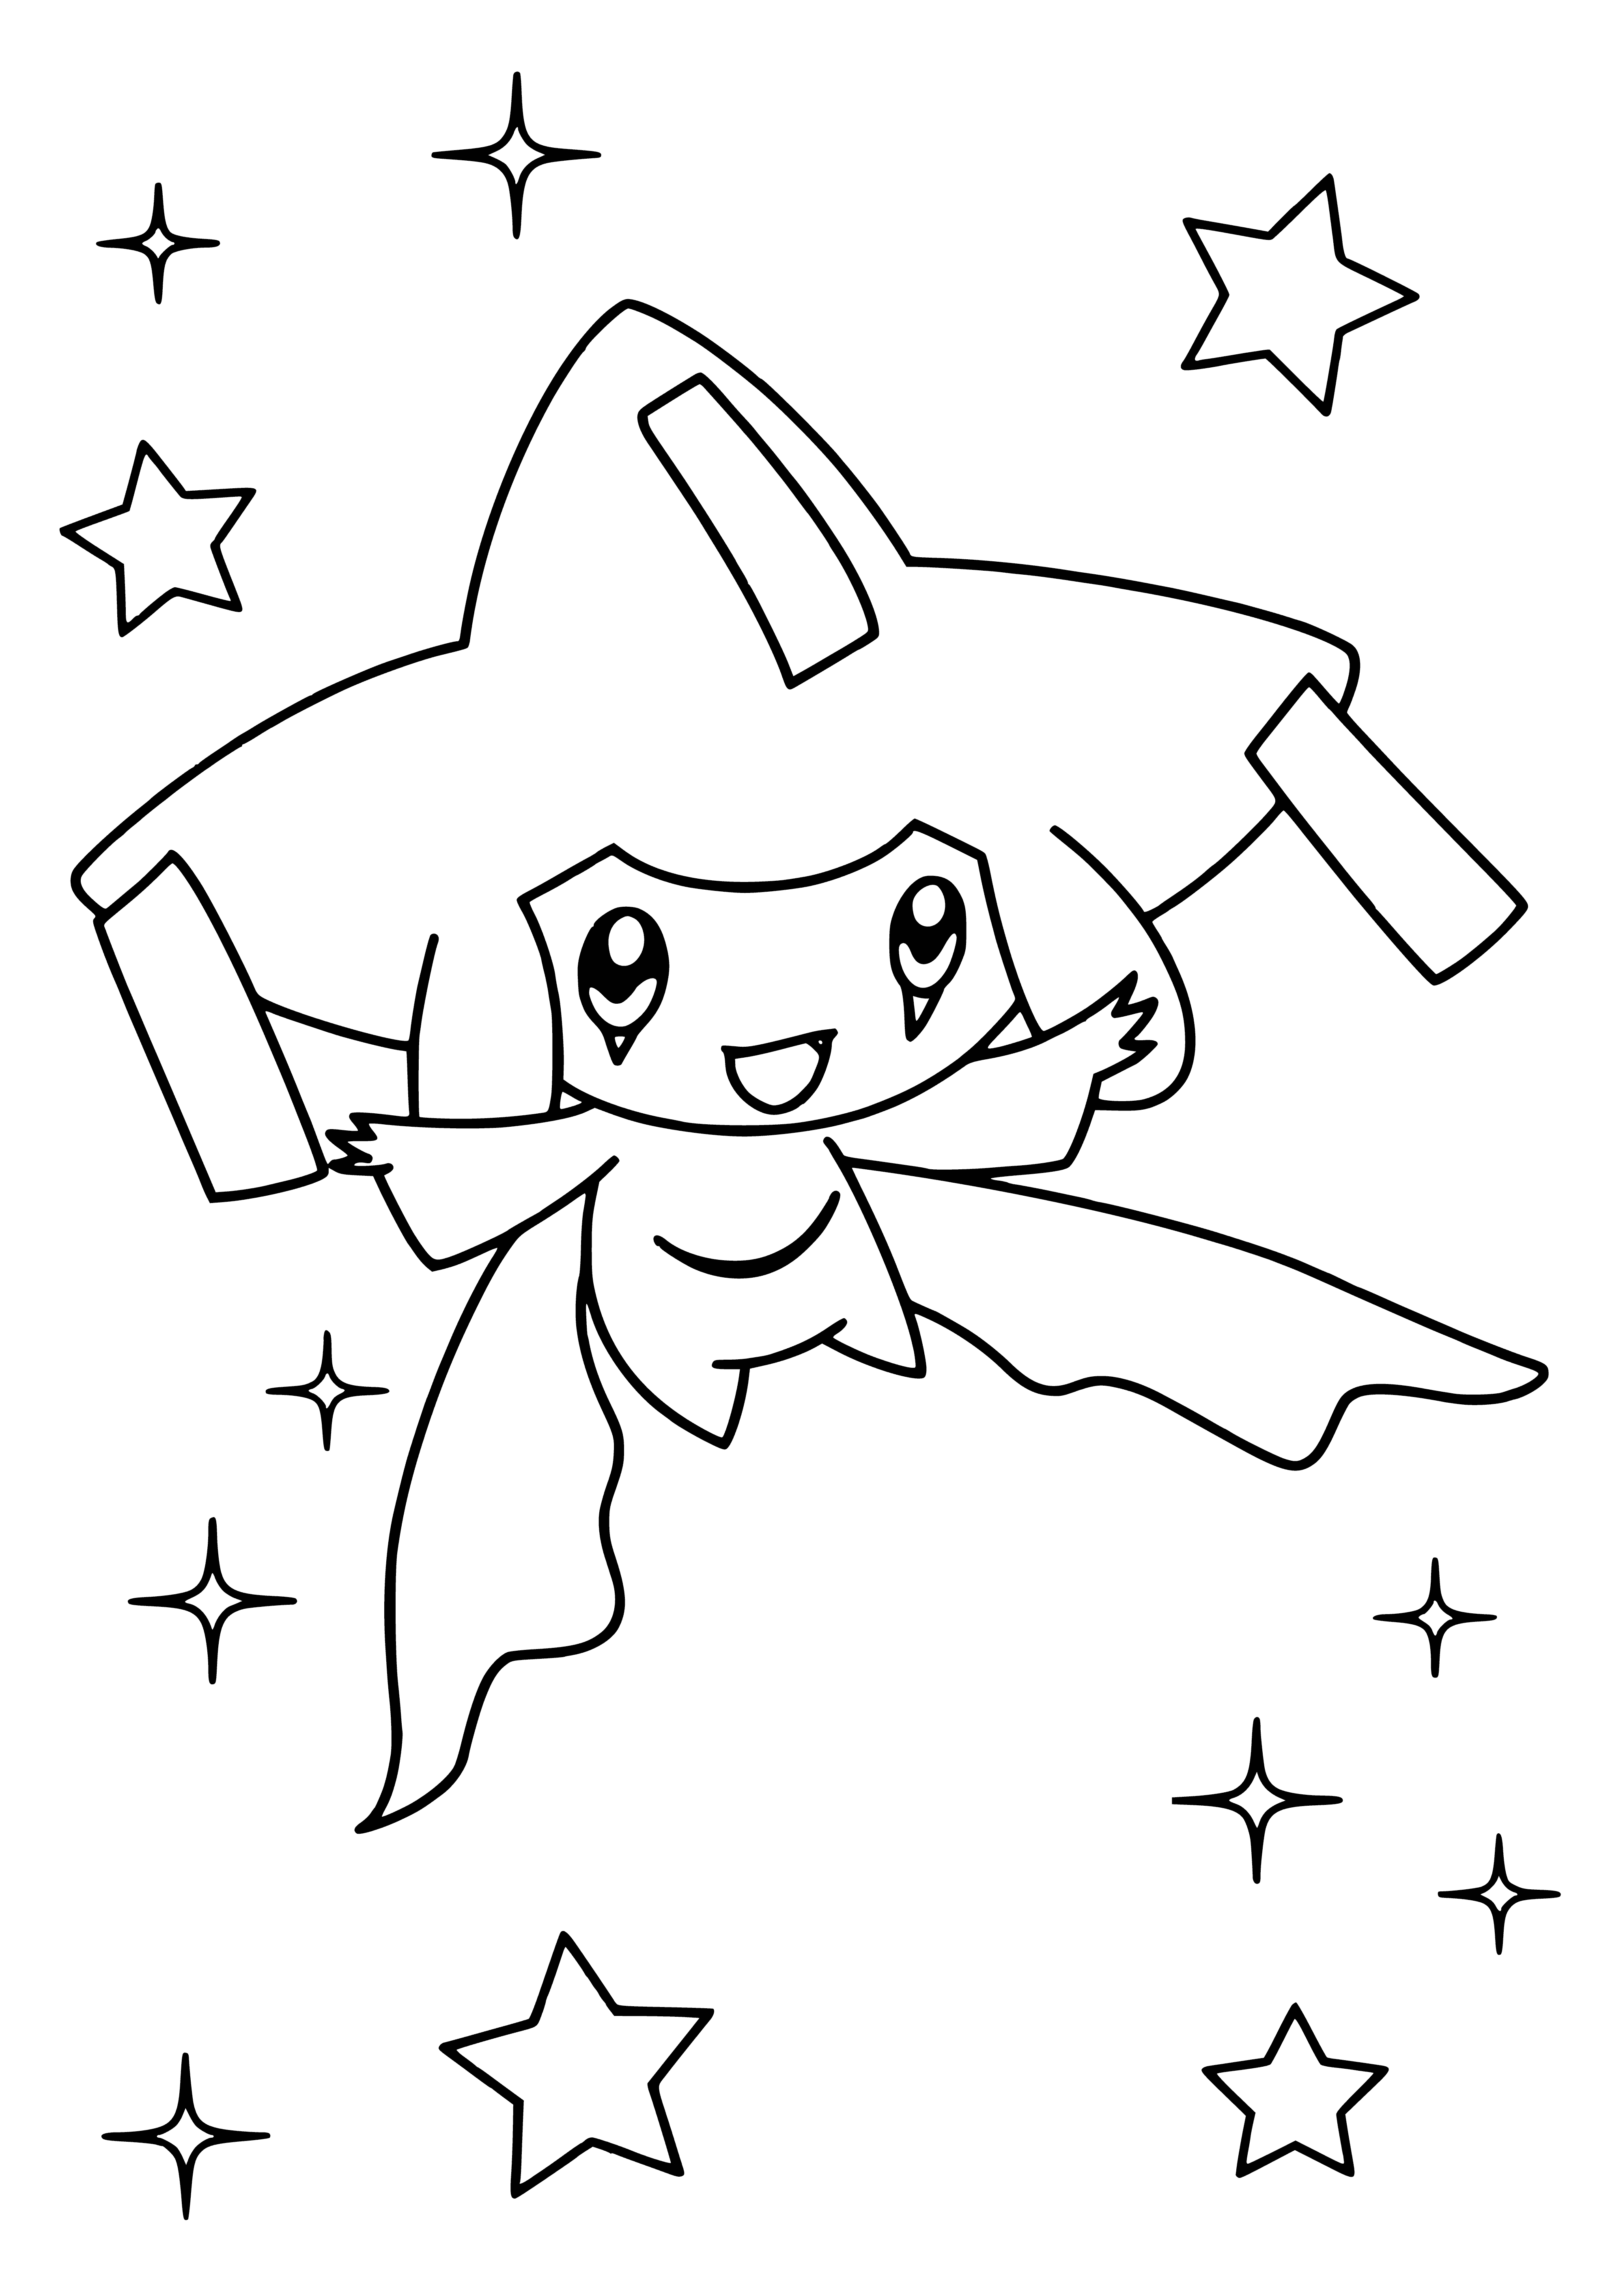 coloring page: Legendary Pokémon Jirachi has a round body with blue stripes, blue crest & two wings, and four small legs with blue feet.